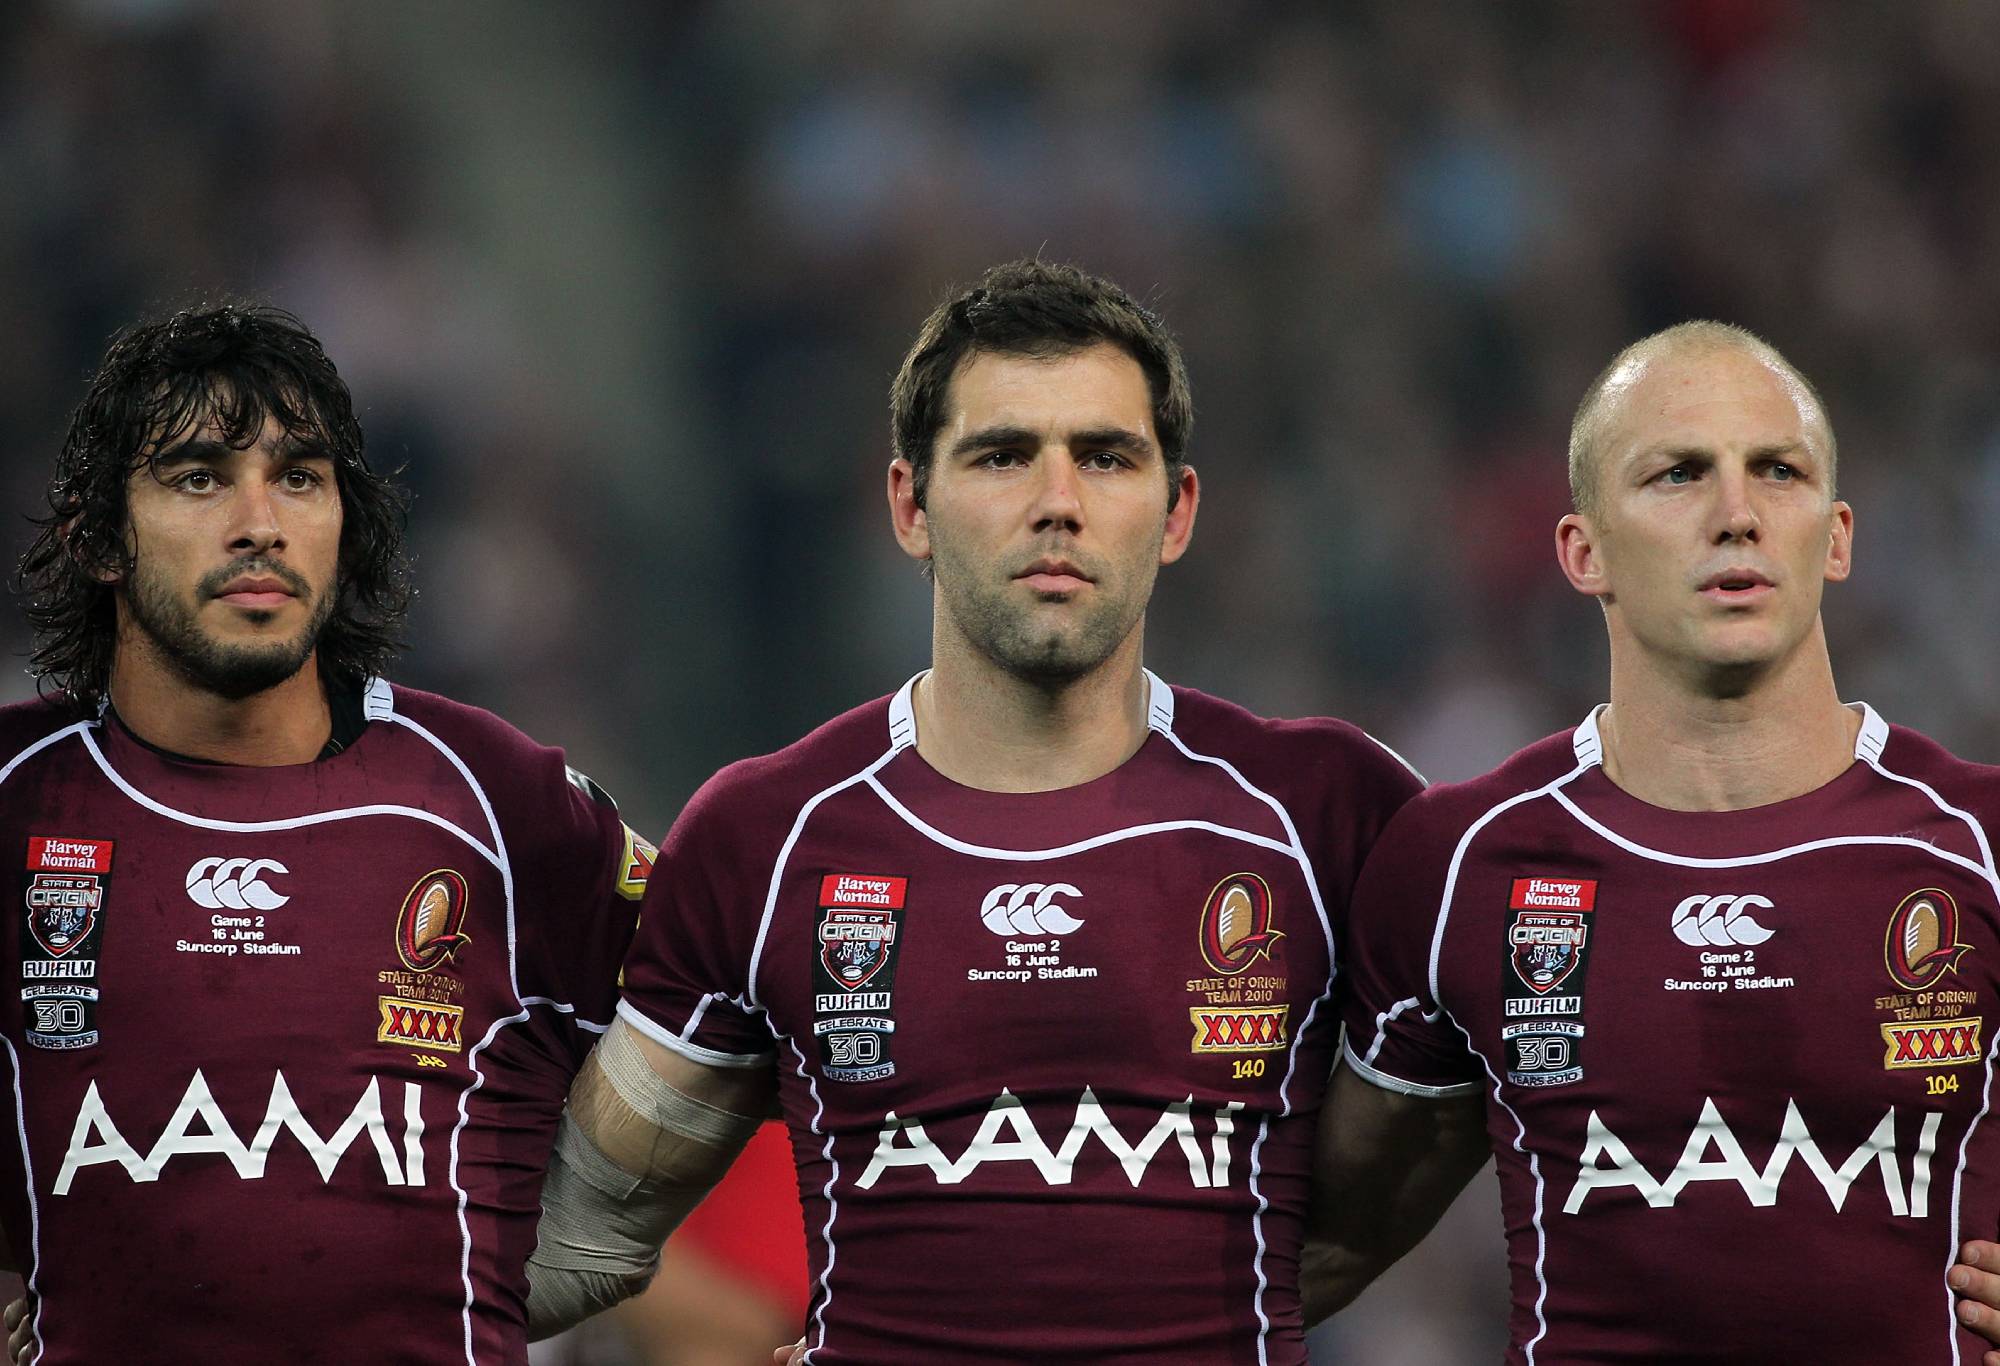 BRISBANE, AUSTRALIA - JUNE 16: (L-R) Johnathan Thurston, Cameron Smith and Darren Lockyer embrace during the national anthem before game two of the ARL State of Origin Series between the New South Wales Blues and the Queensland Maroons at Suncorp Stadium on June 16, 2010 in Brisbane, Australia. (Photo by Bradley Kanaris/Getty Images)